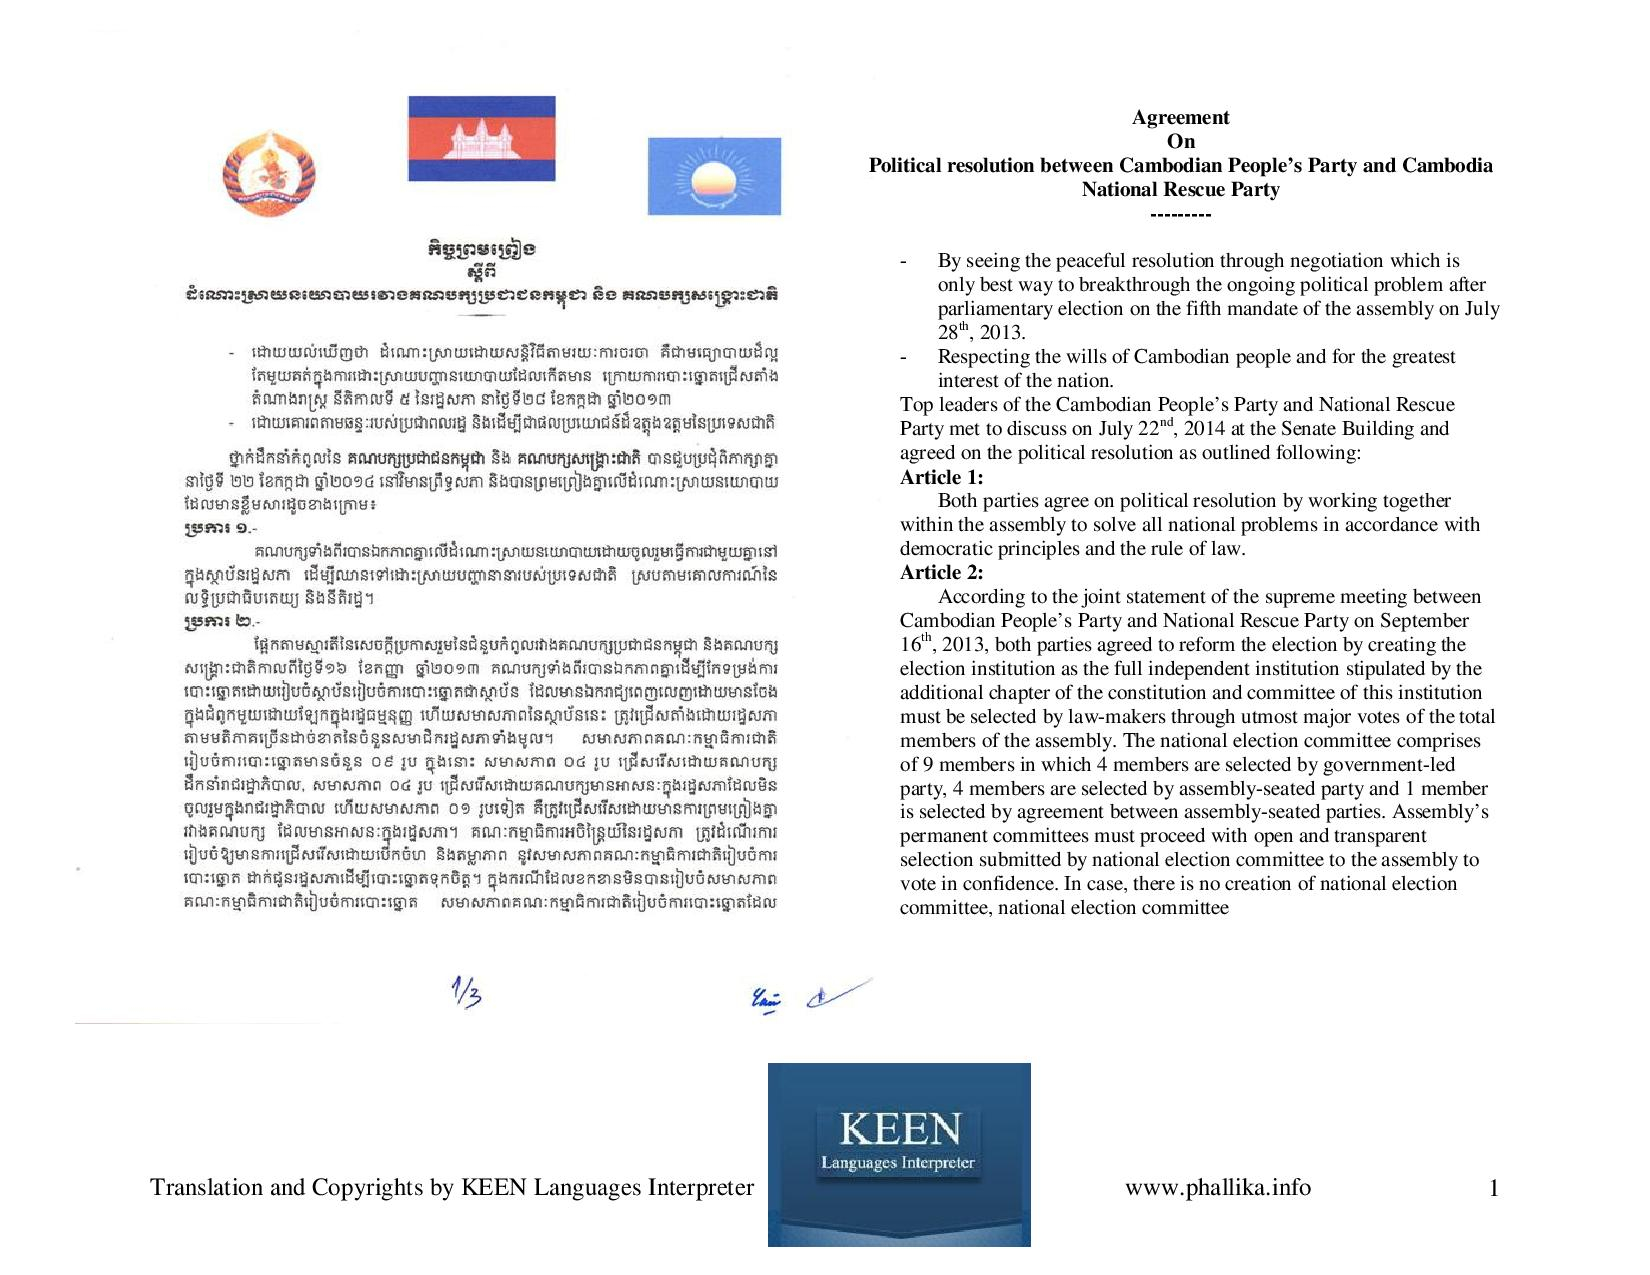 Negotiation And Agreement Translation Of Negotiation Agreement Between Cnrp And Cpp Cambodia